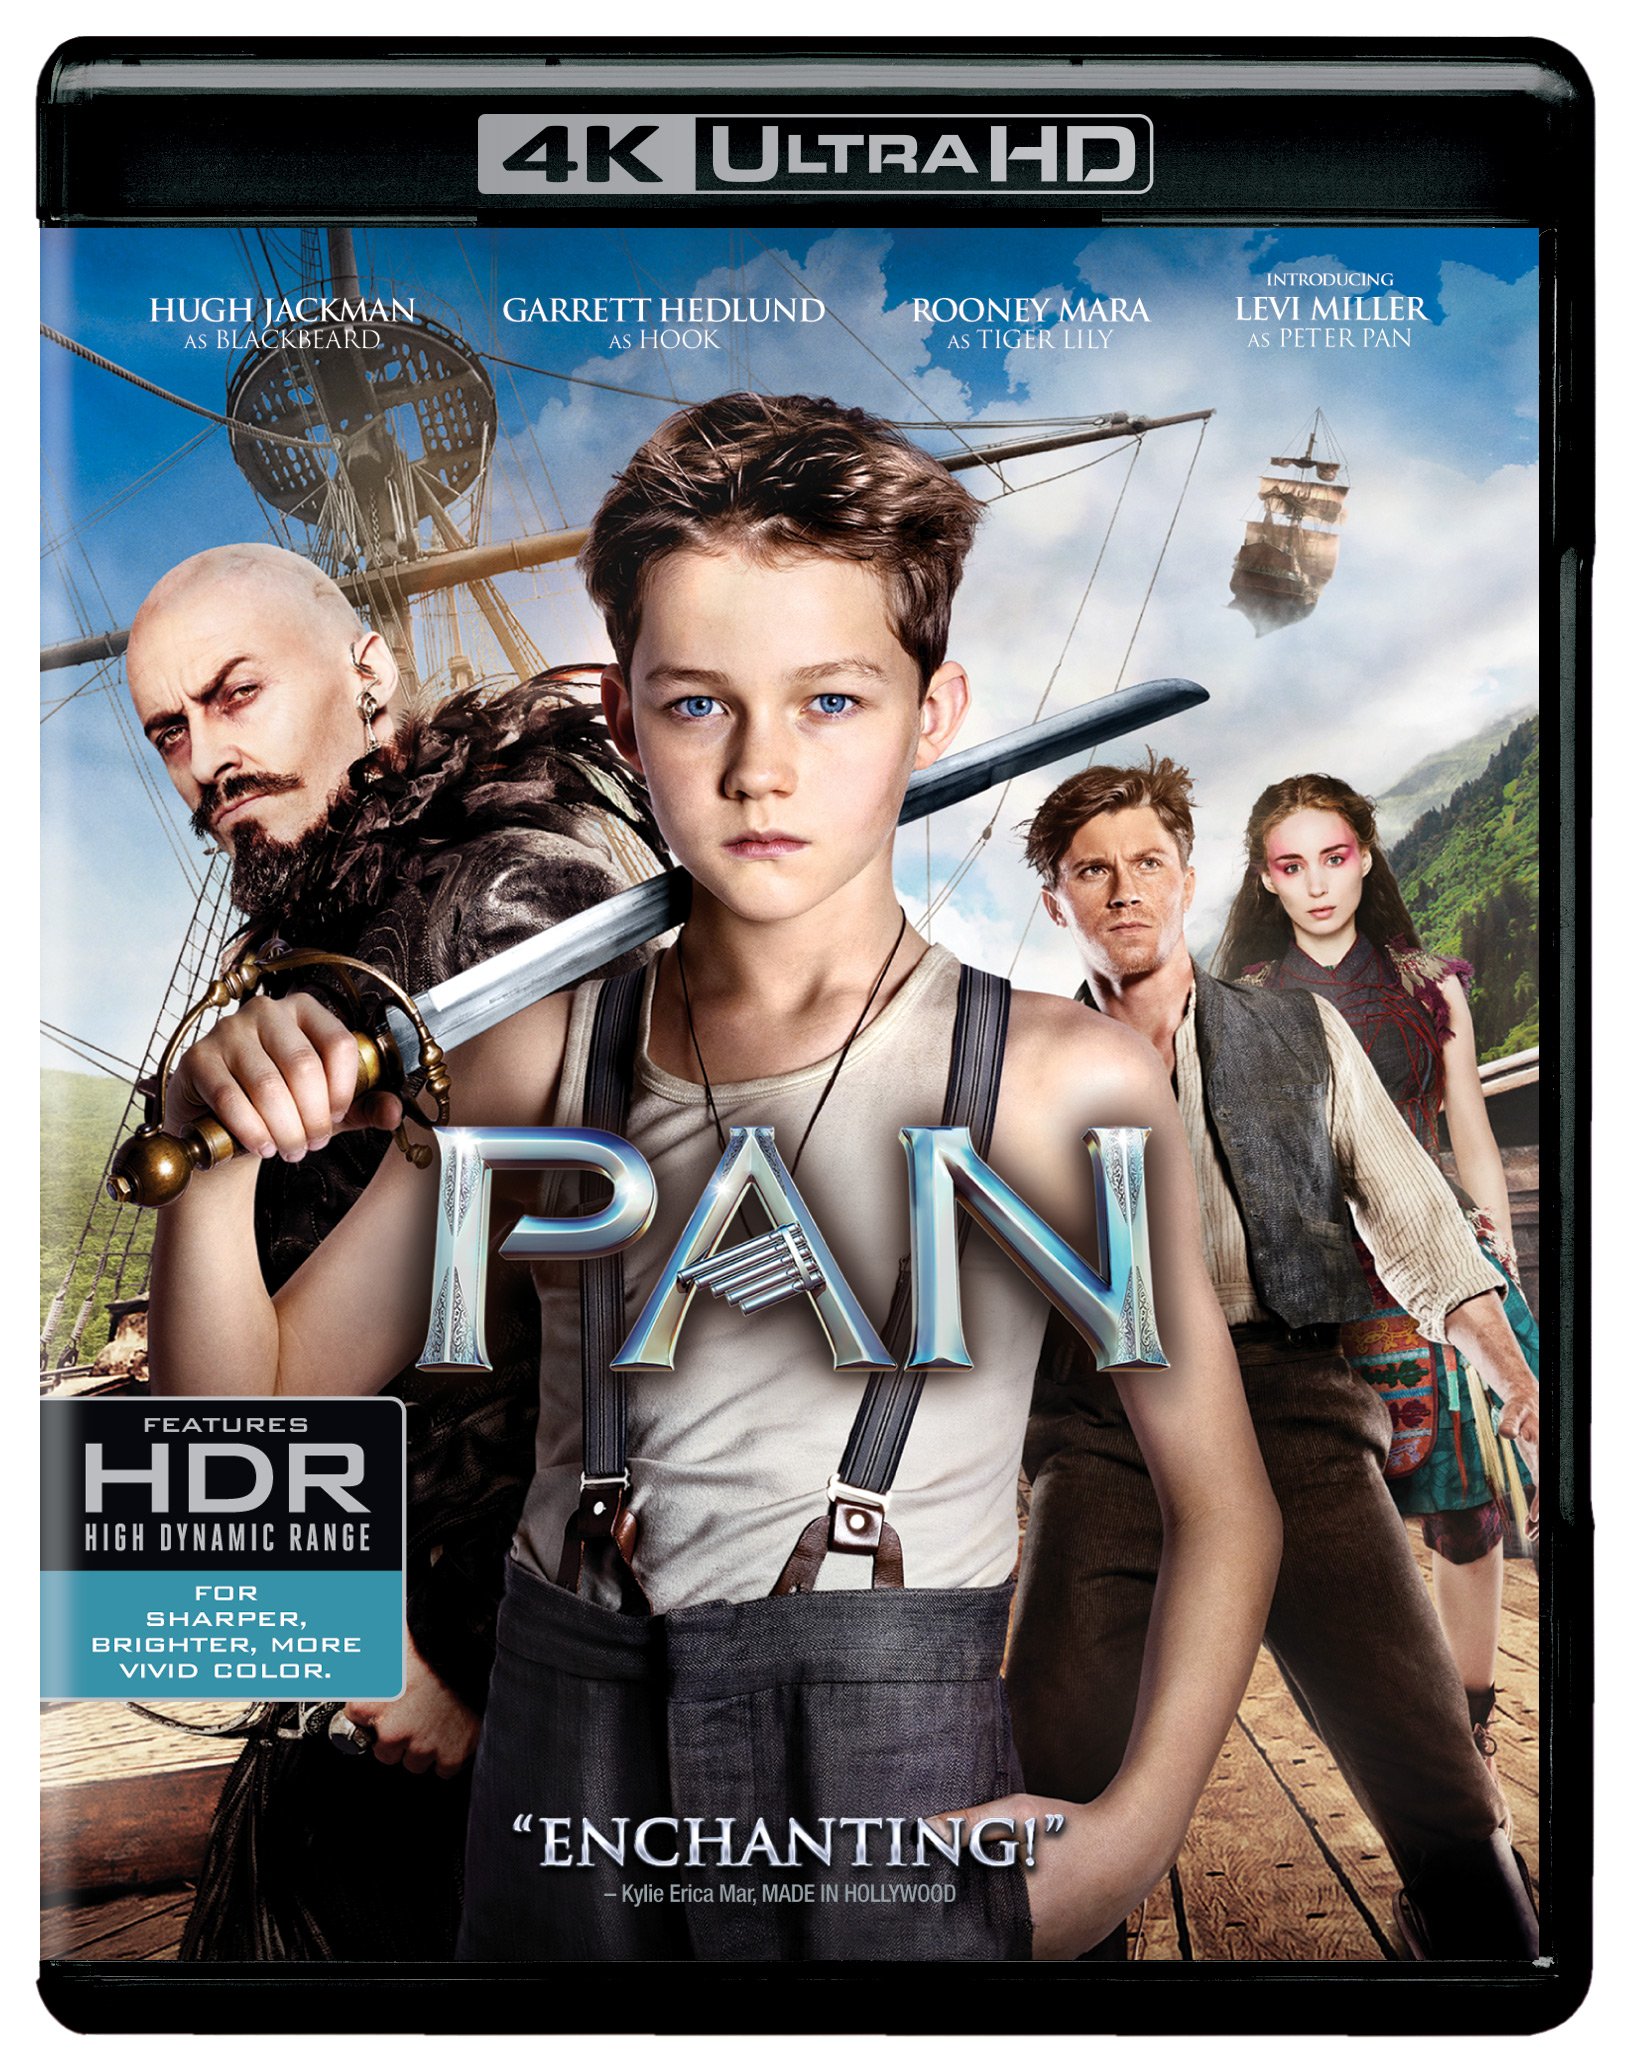 pan-4k-uhd-hd-movie-purchase-or-watch-online